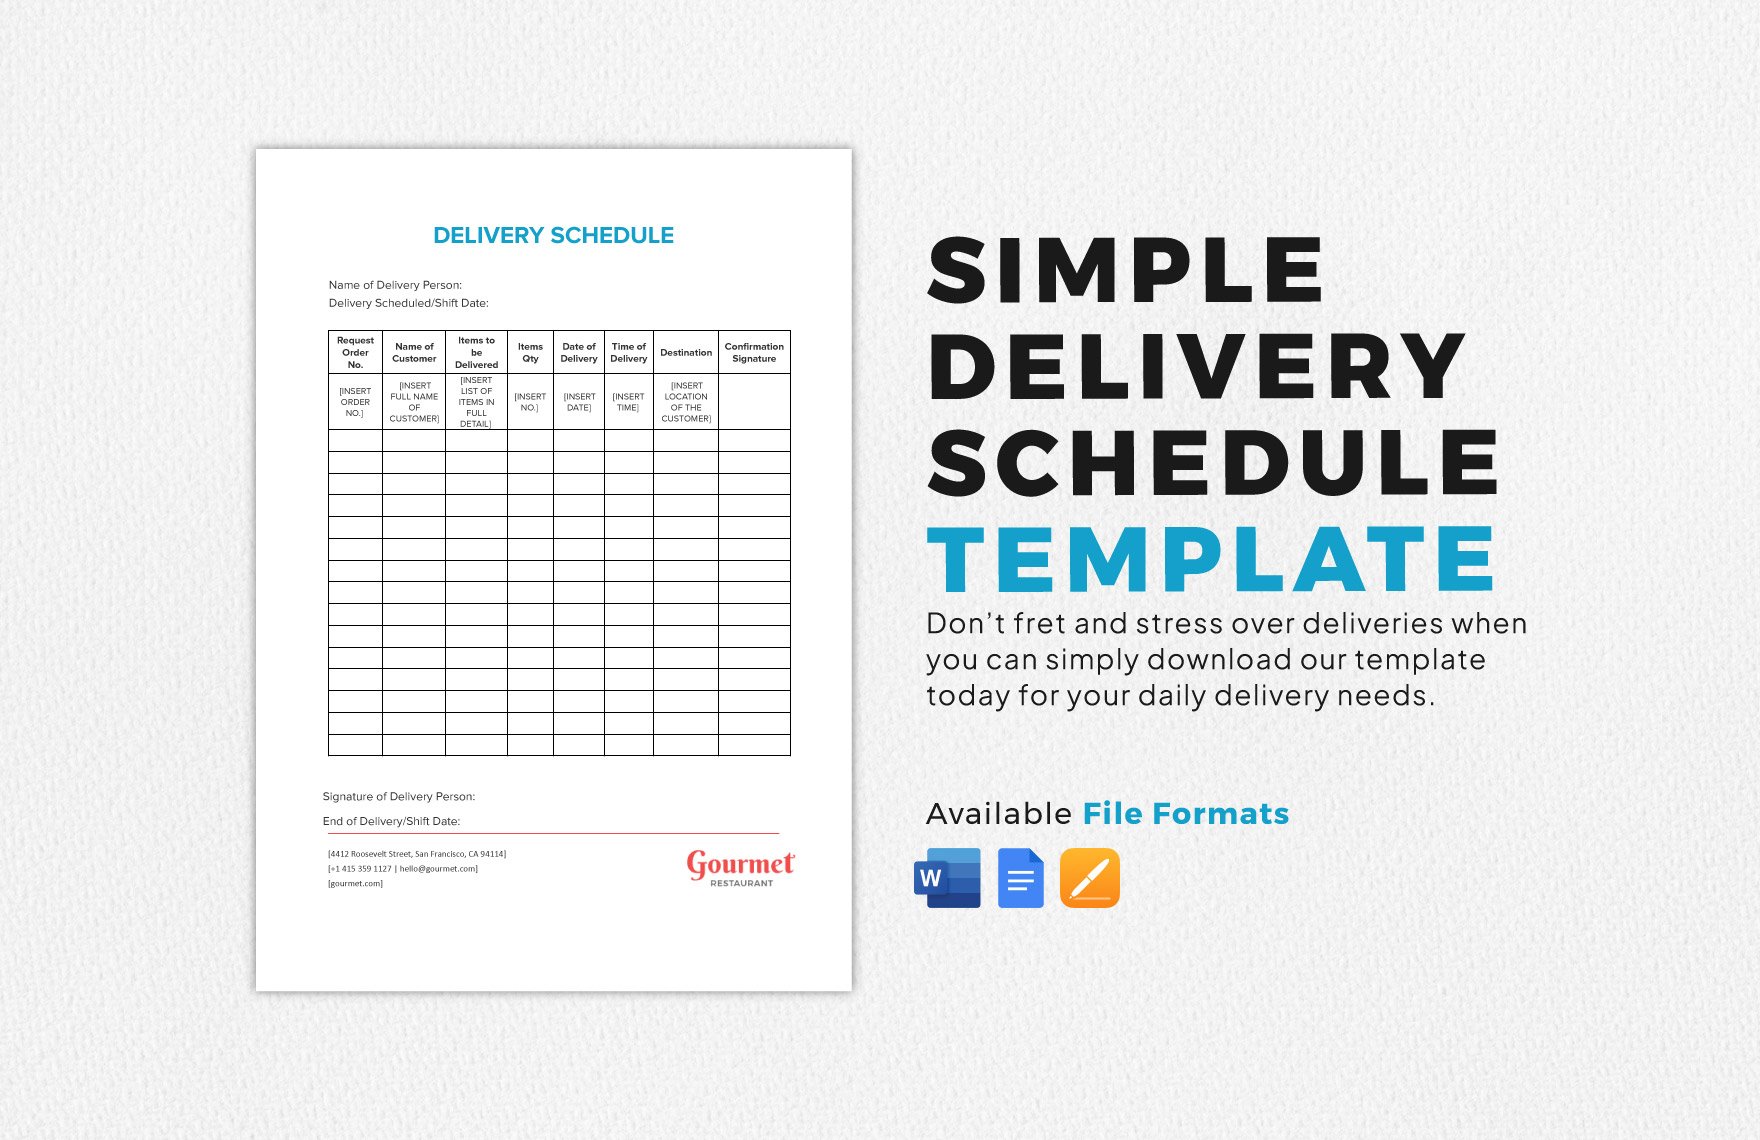 Simple Delivery Schedule Template